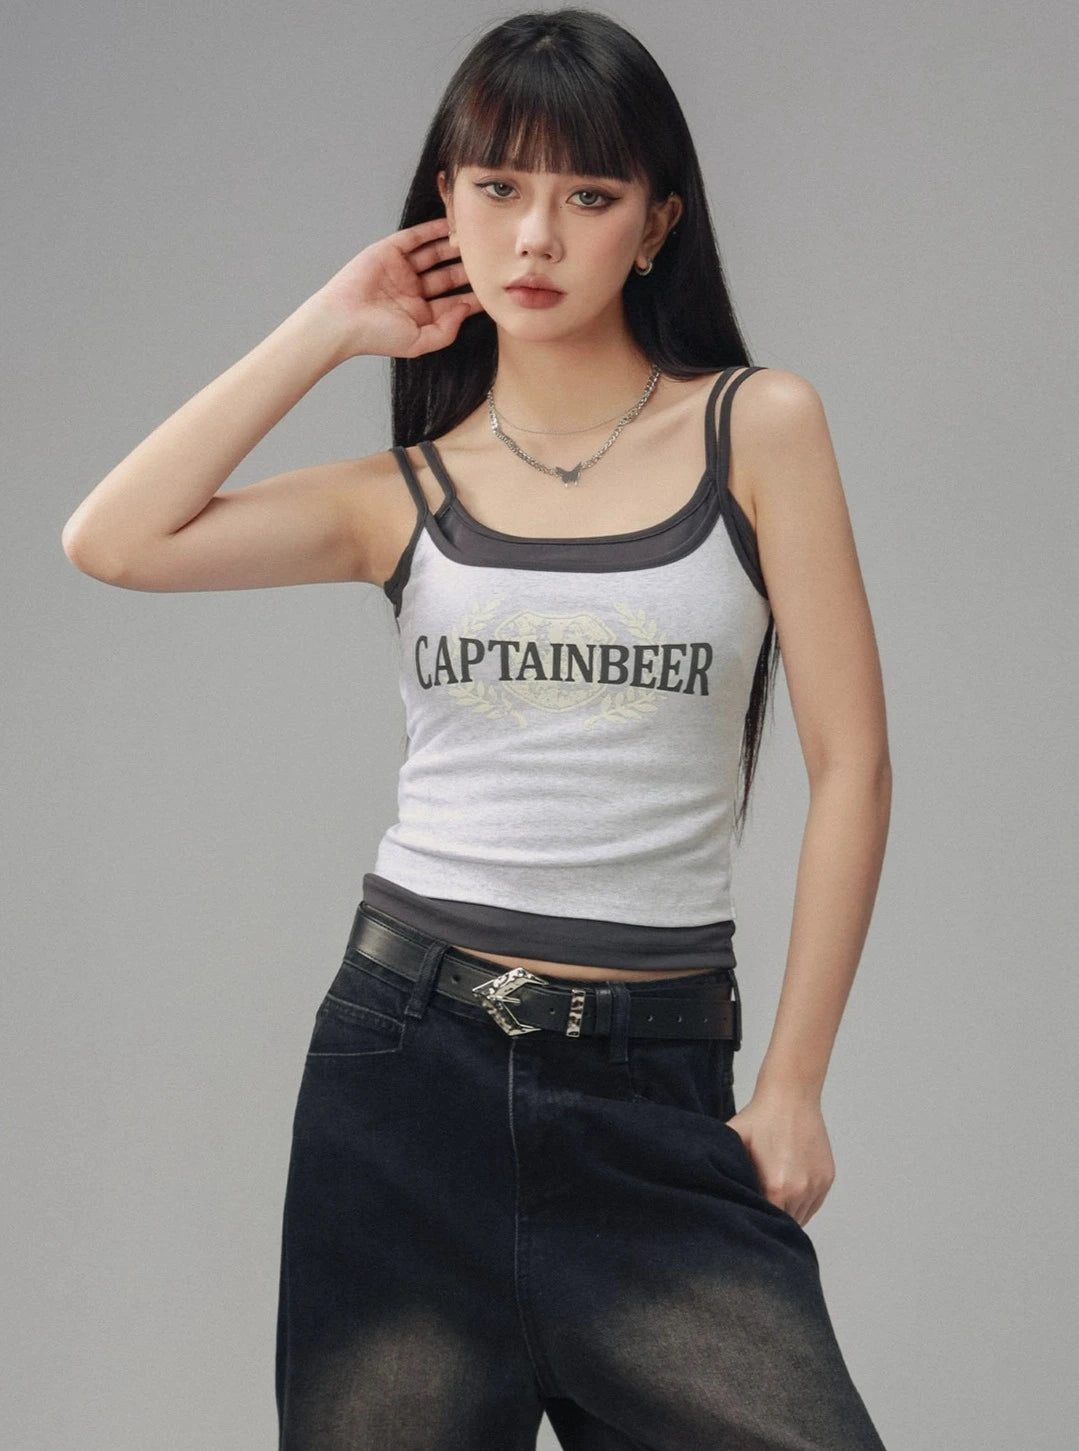 CaptainBeer Spicy Outerwear Top